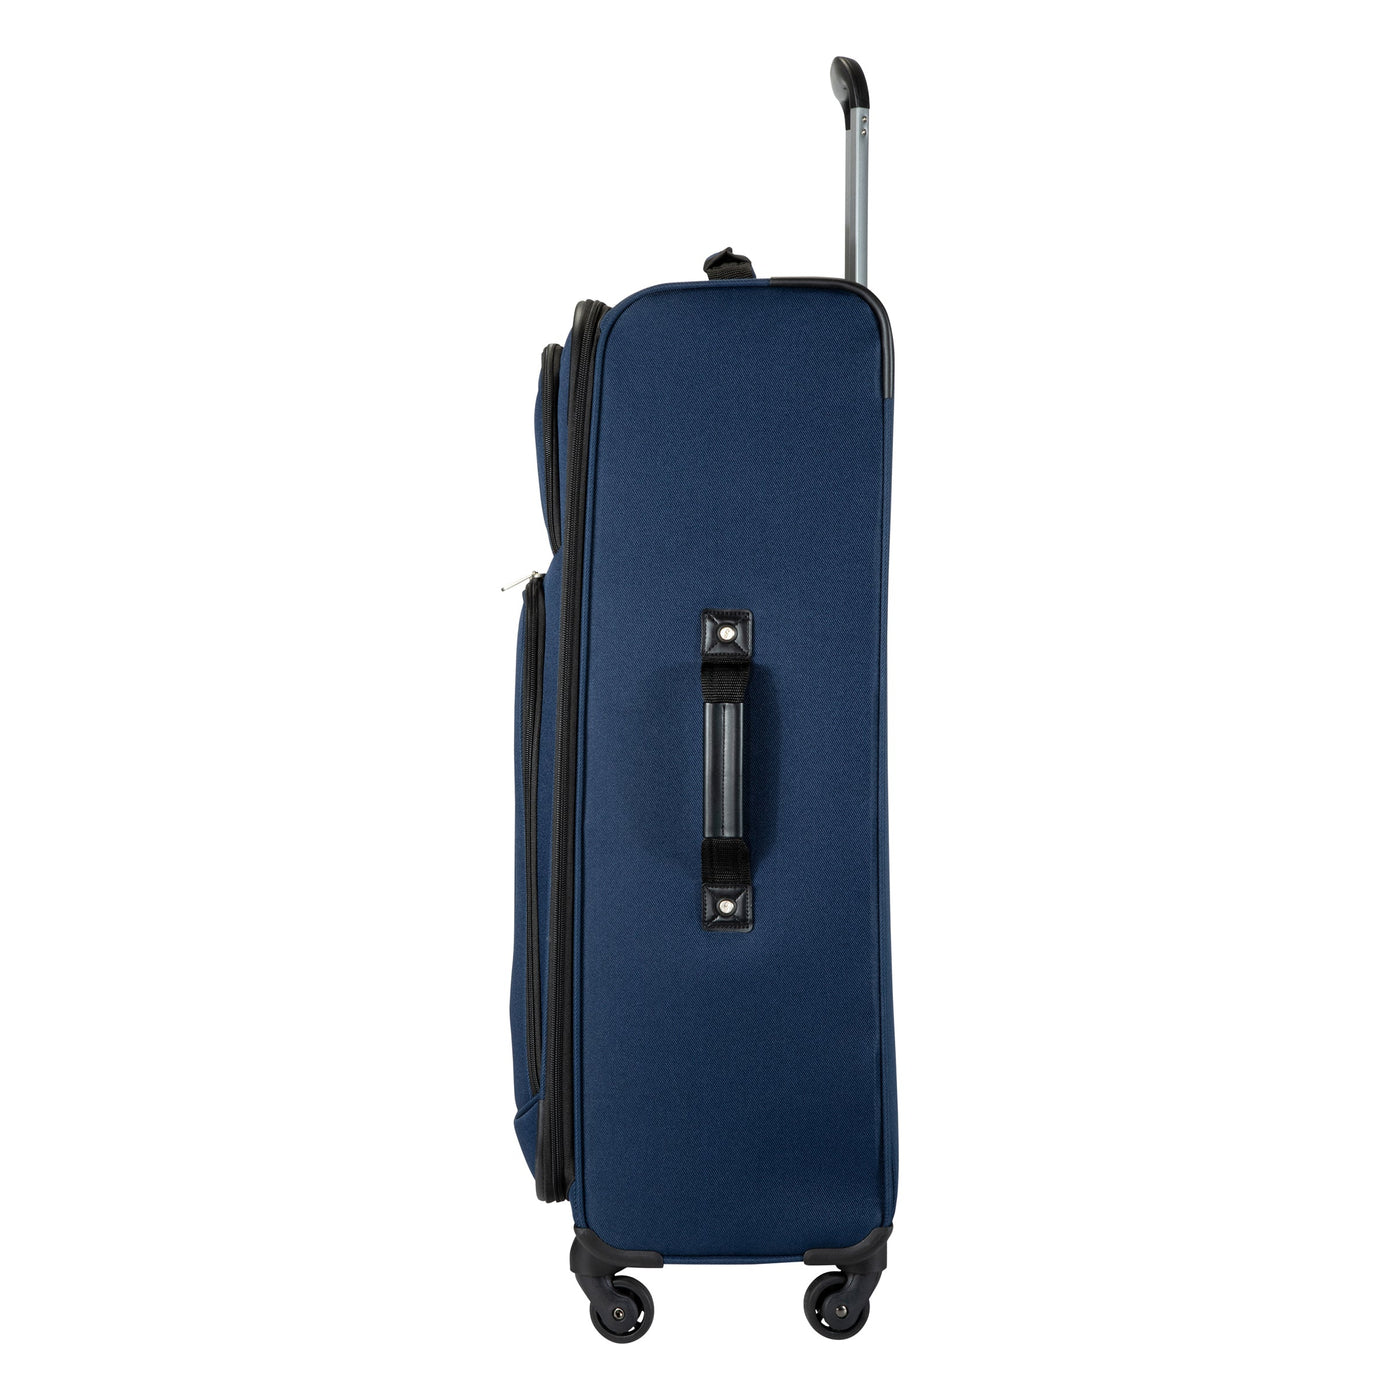 Epic Softside 3-Piece Set - Carry-On, Medium, and Large Check-In